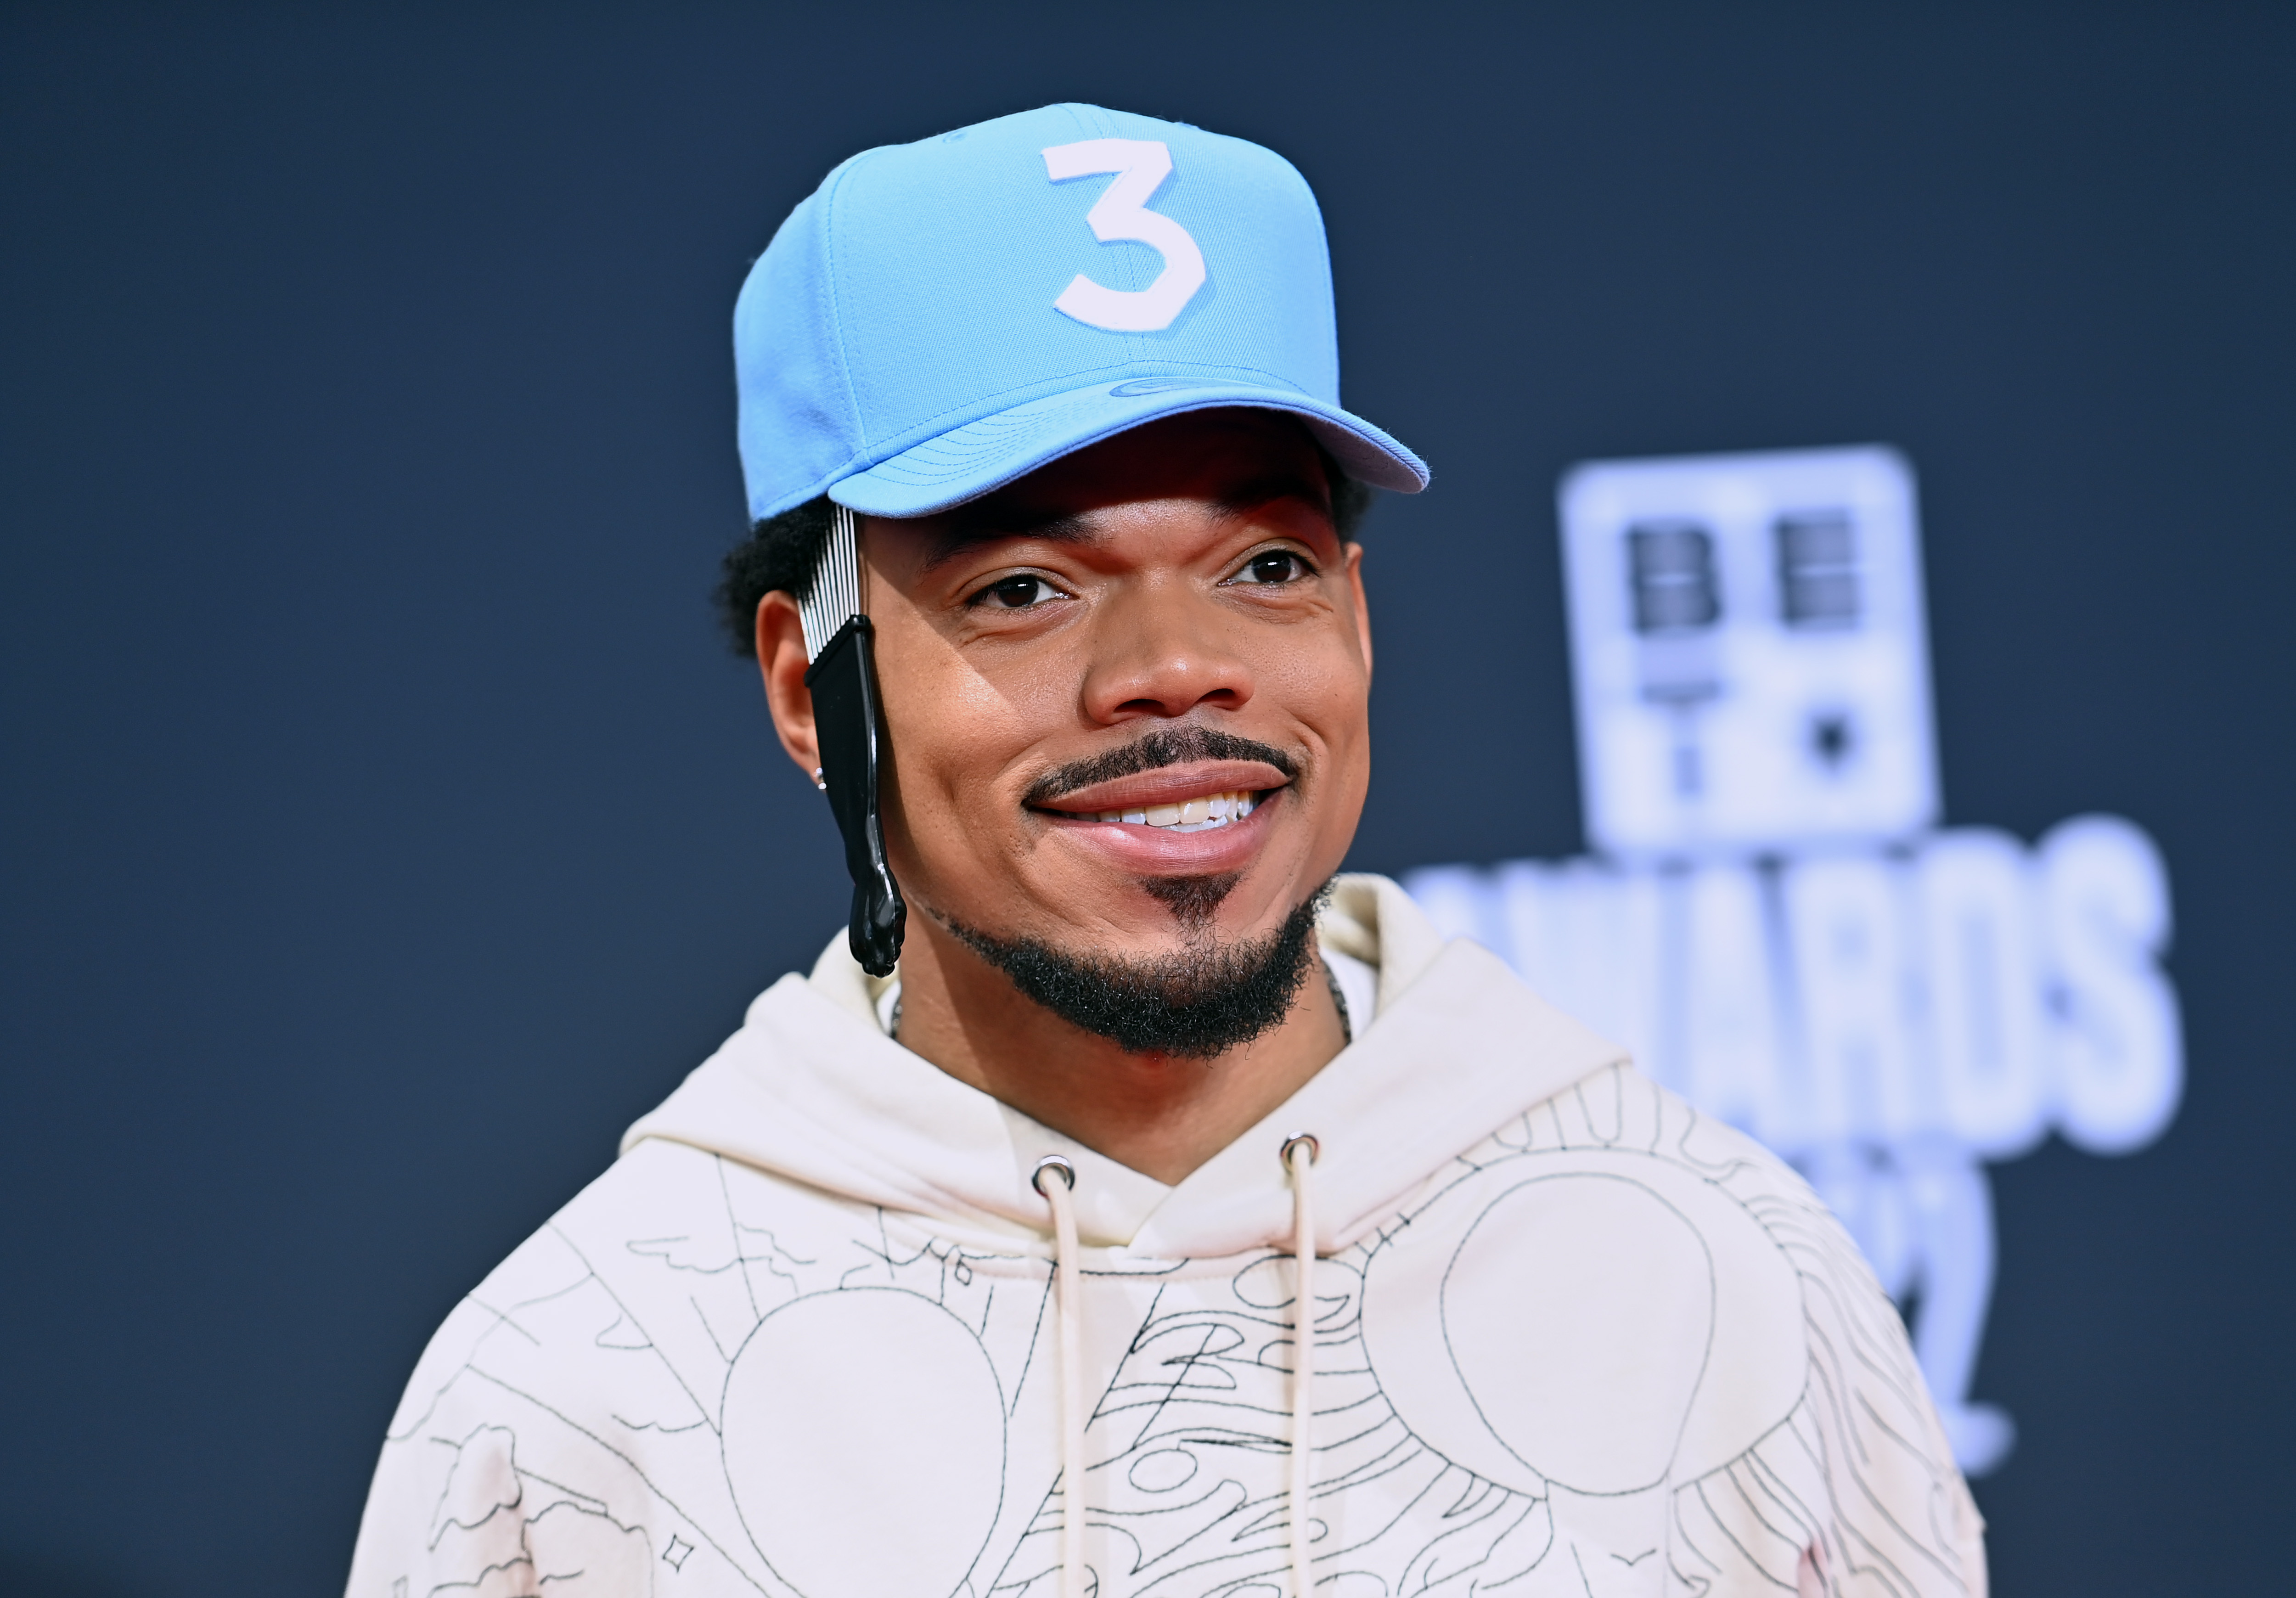 Famous musician Chance the Rapper wearing a blue hat smiling for photographers.